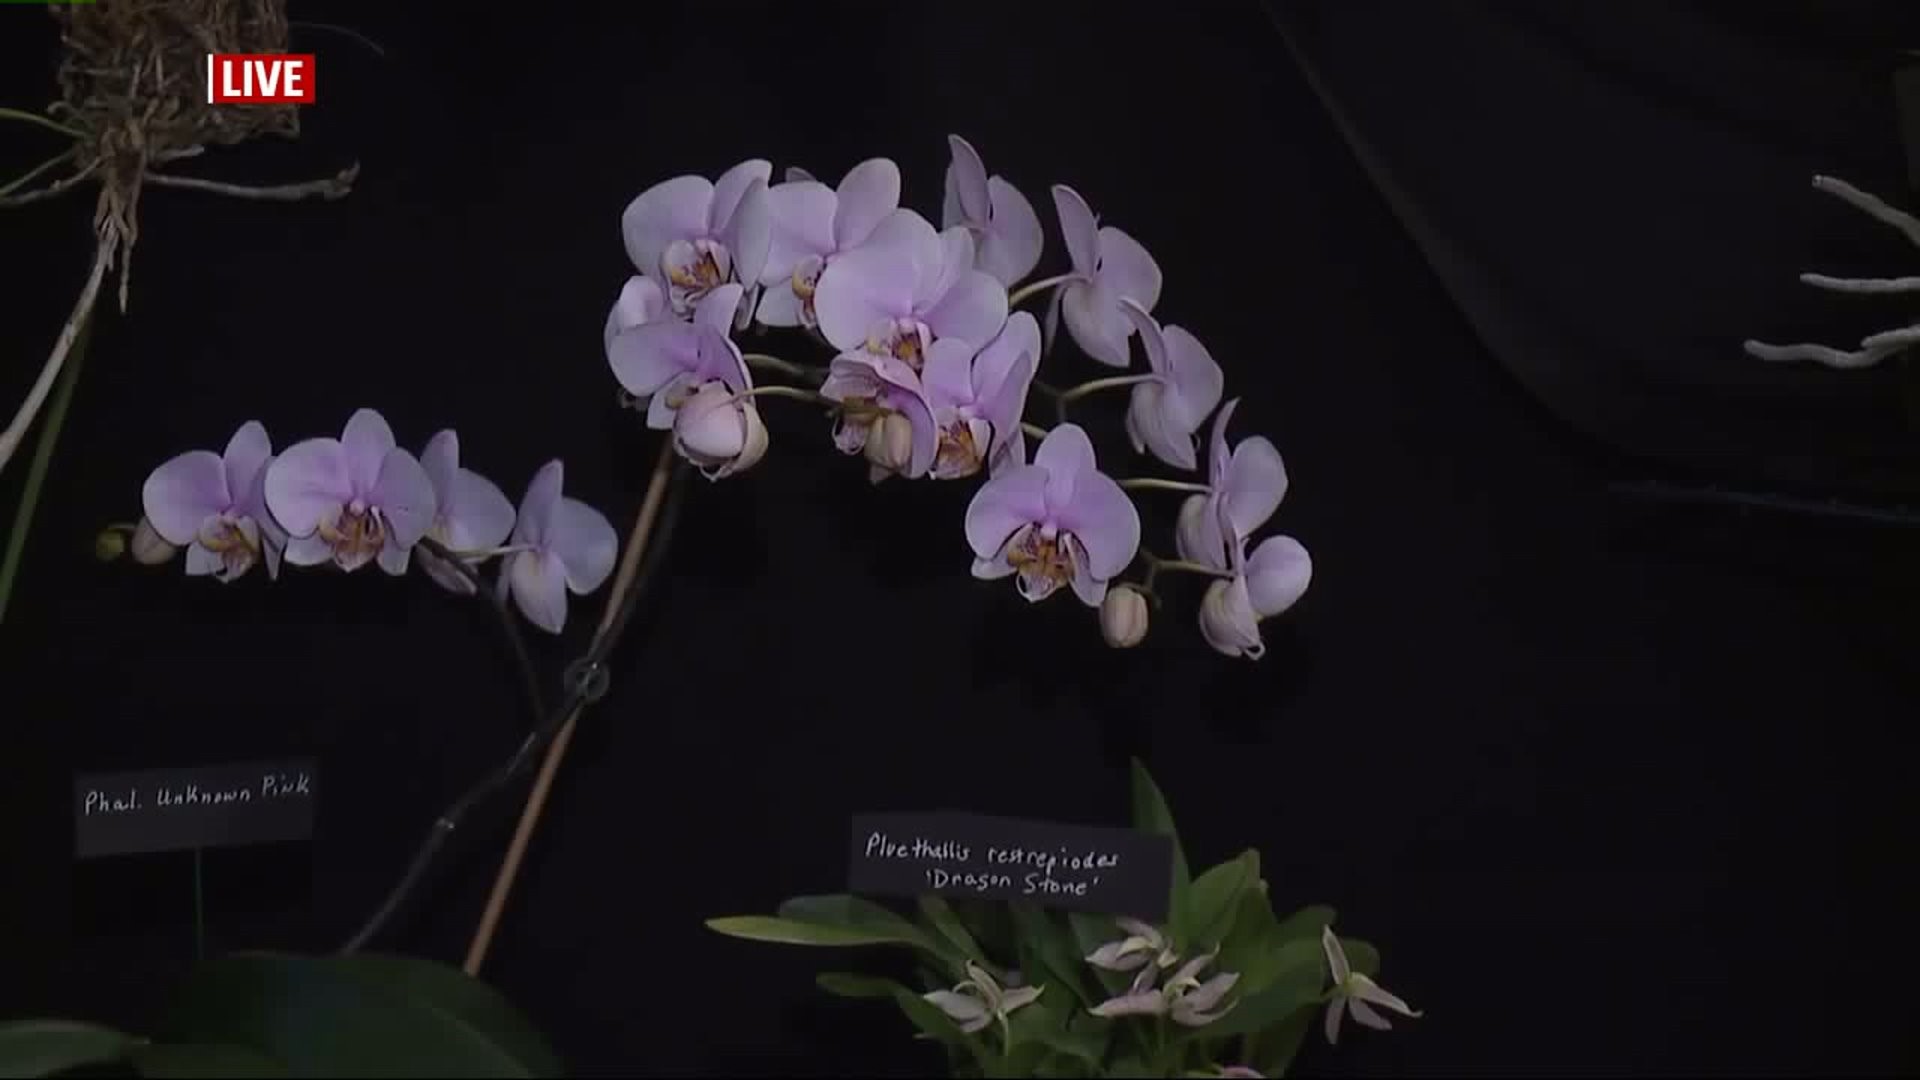 Capture the beauty of over a thousand orchids at Hershey Gardens Orchid Show